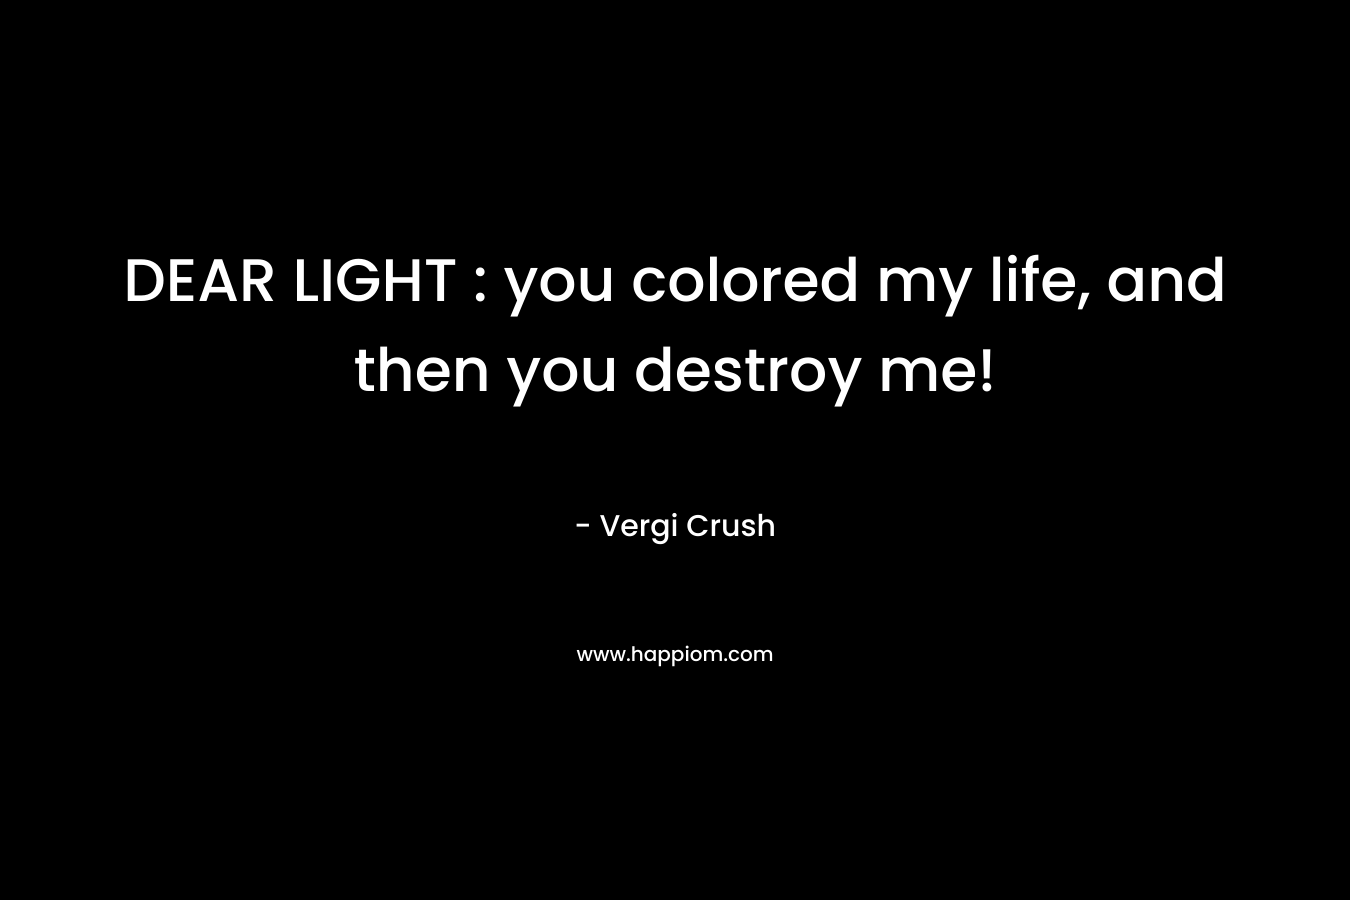 DEAR LIGHT : you colored my life, and then you destroy me!